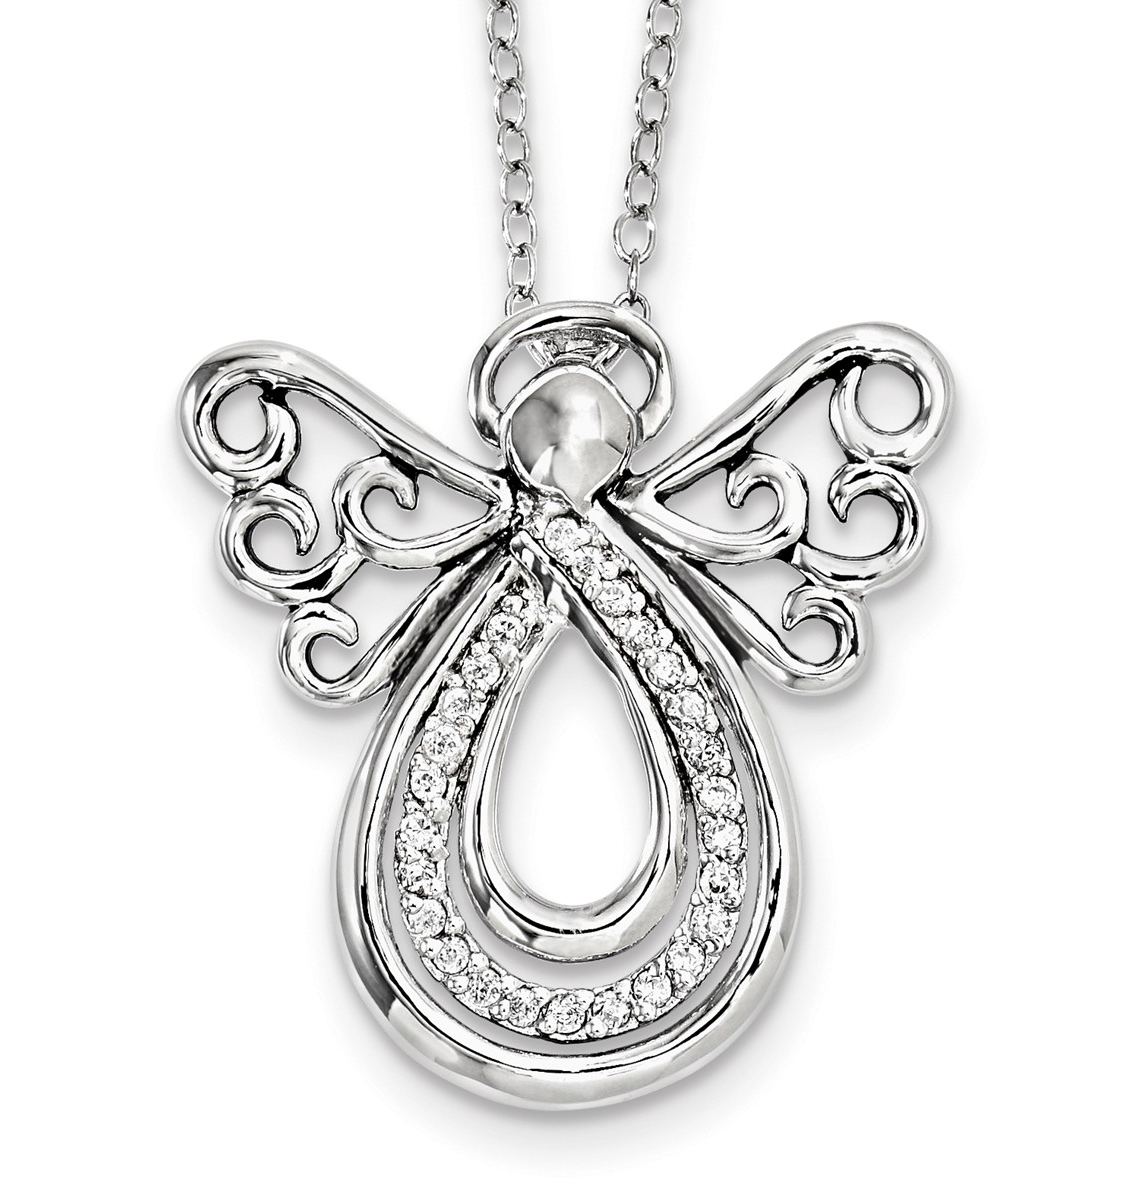  'Angel of Comfort' CZ Pendant Necklace, Antiqued Rhodium-Plated Sterling Silver, 18